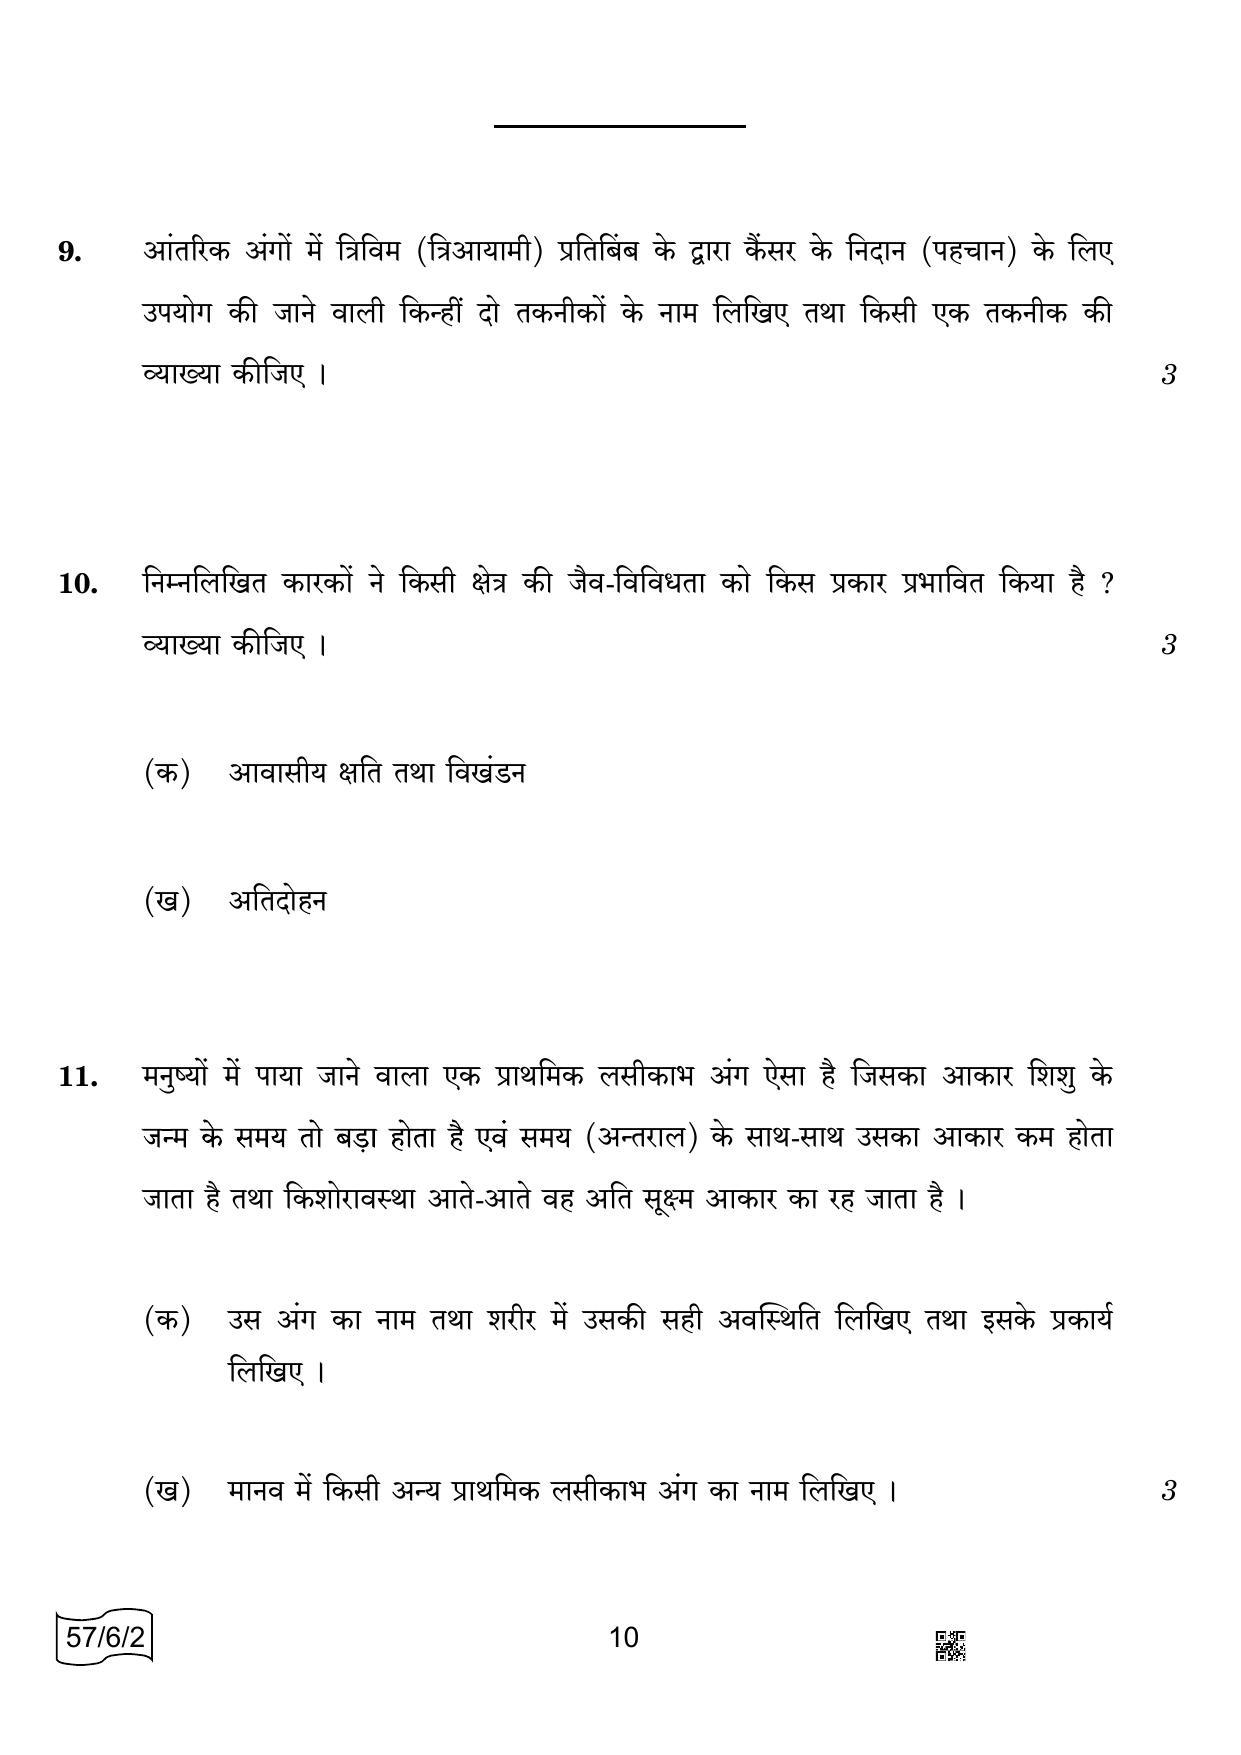 CBSE Class 12 57-6-2 BIOLOGY 2022 Compartment Question Paper - Page 10